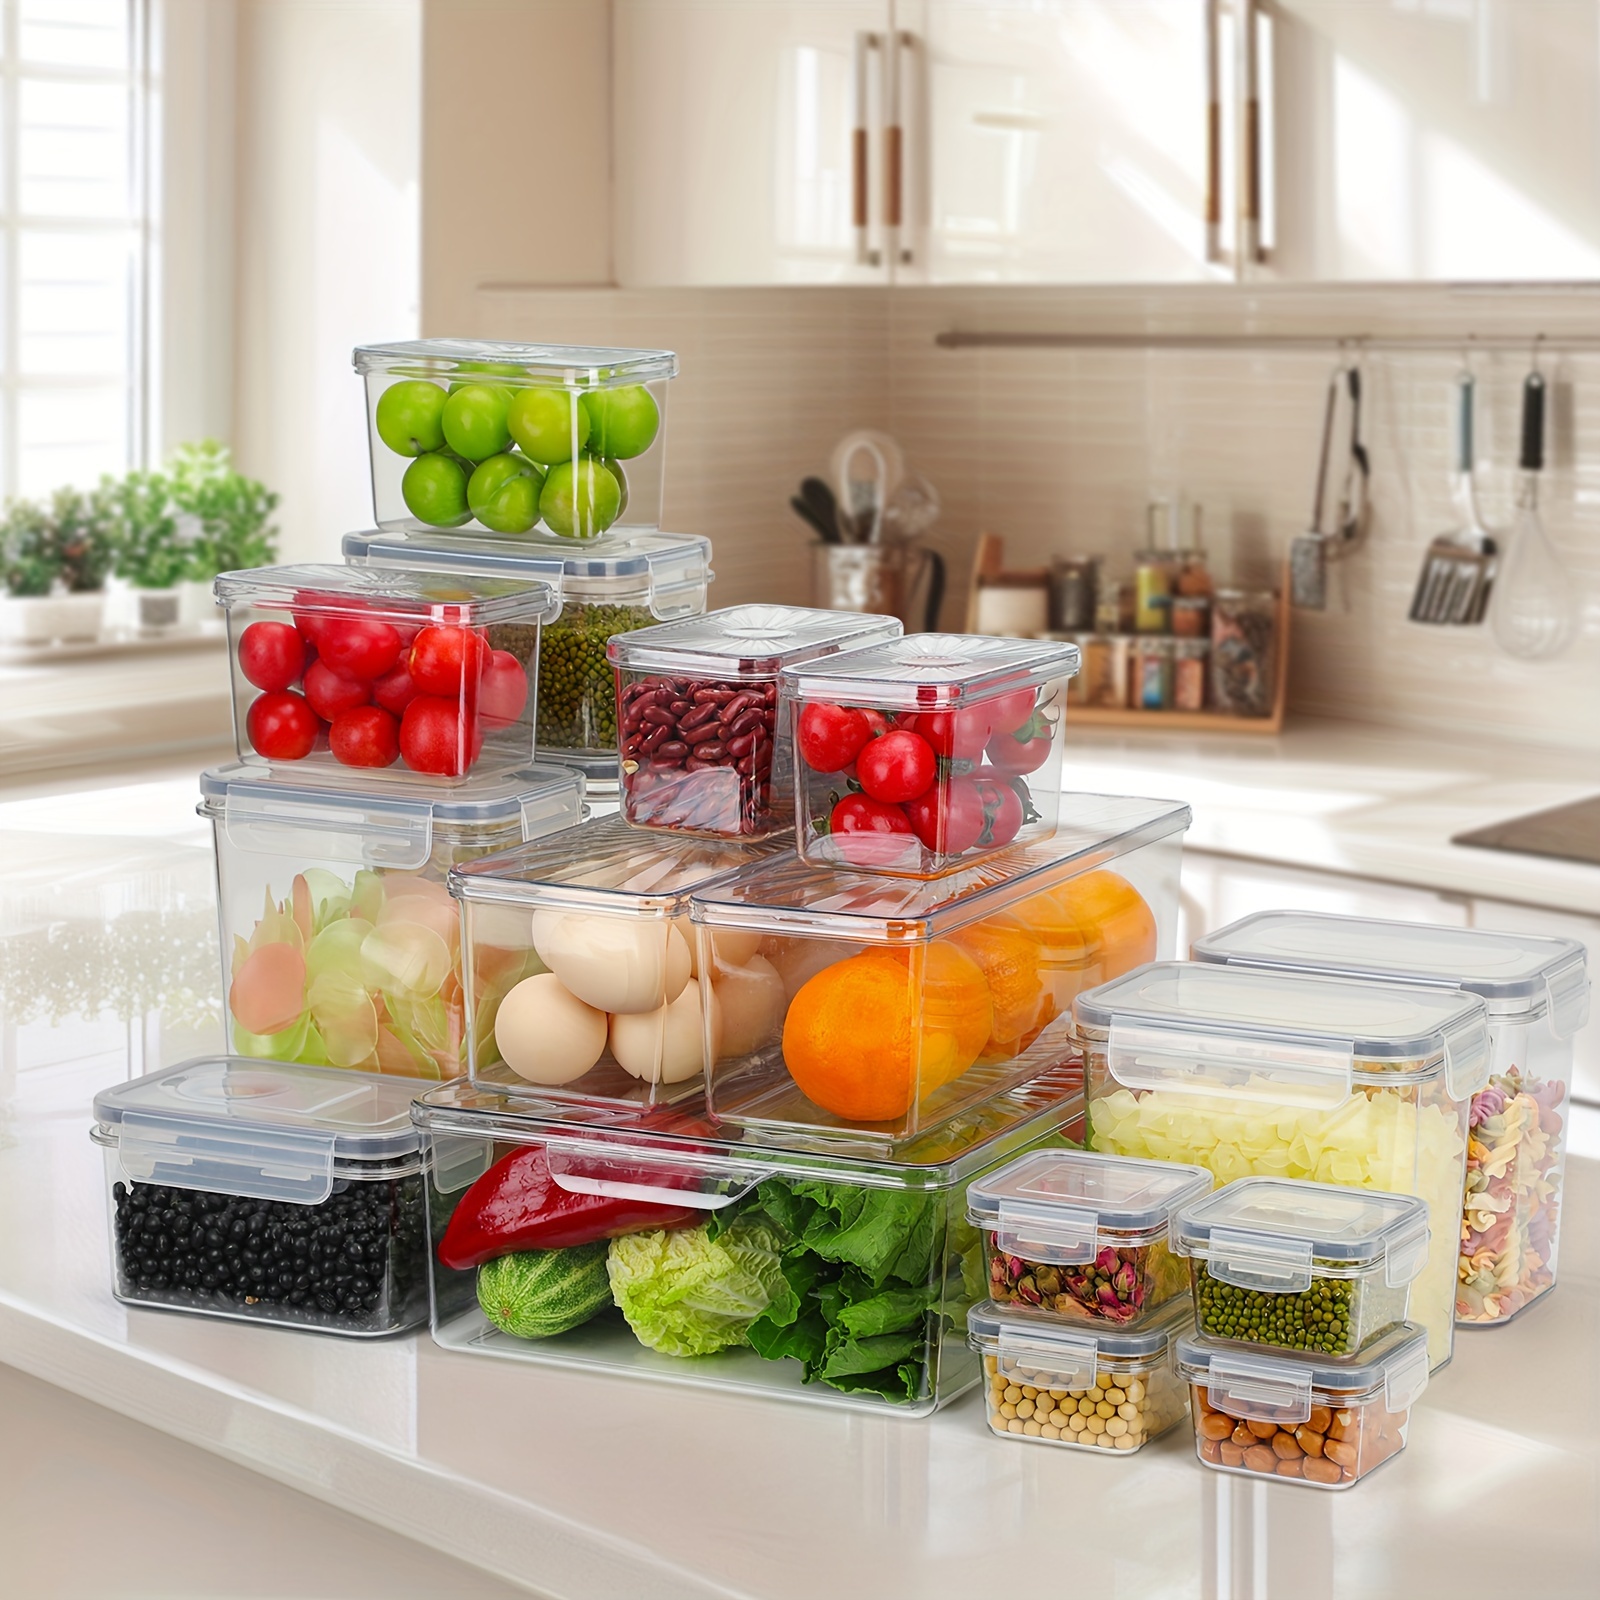 

11pack, 17pack Refrigerator Organizer Bins, Stackable Fridge Organizers And Storage With Lids, Bpa-free, Fridge Storage Containers For Fruits, Vegetables, Food, Drinks, Cereals